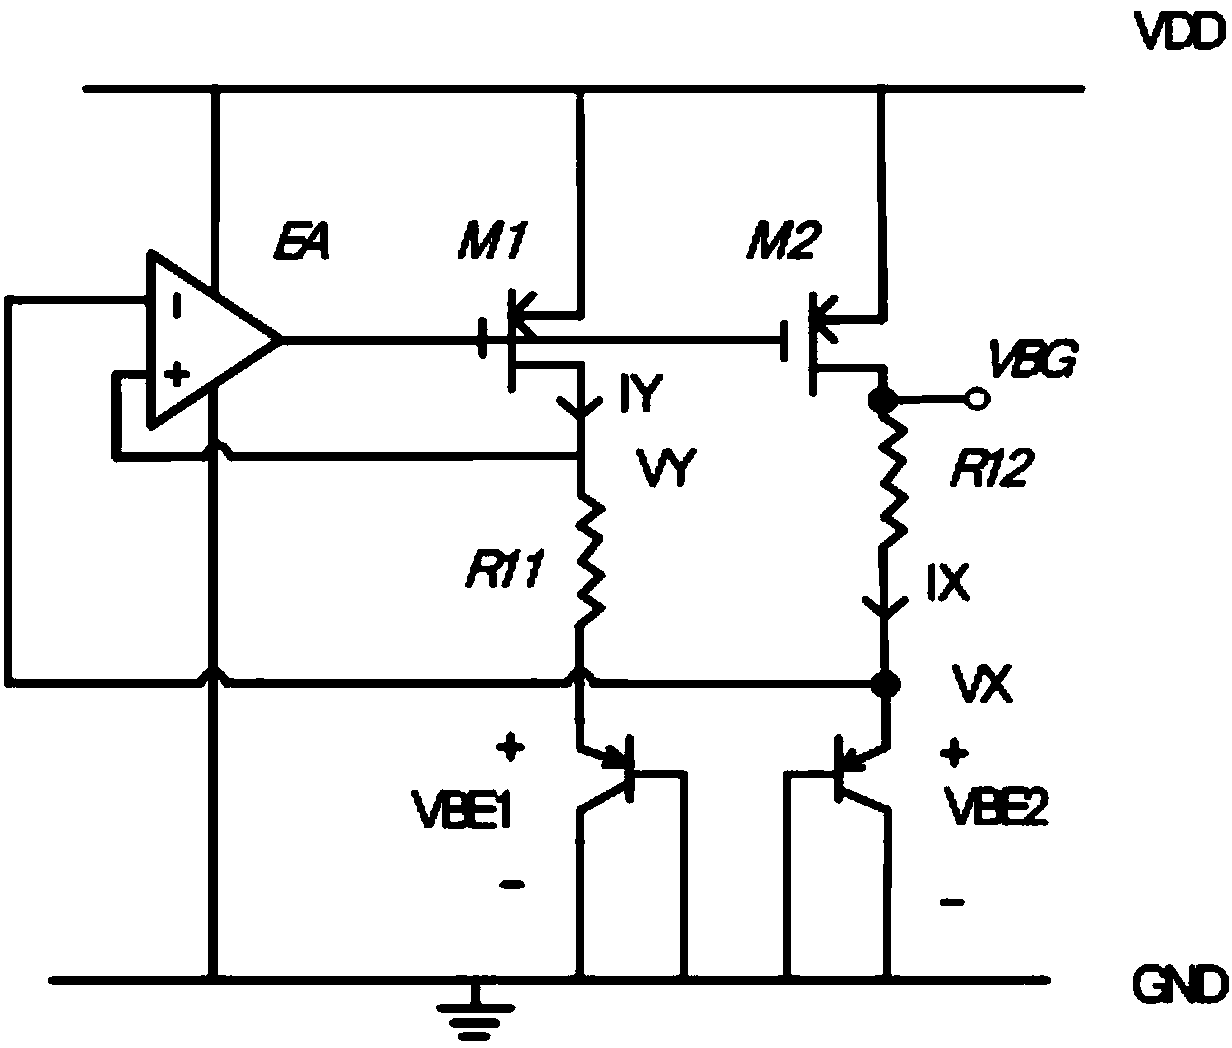 Band-gap reference voltage source design with high gain and high rejection ratio